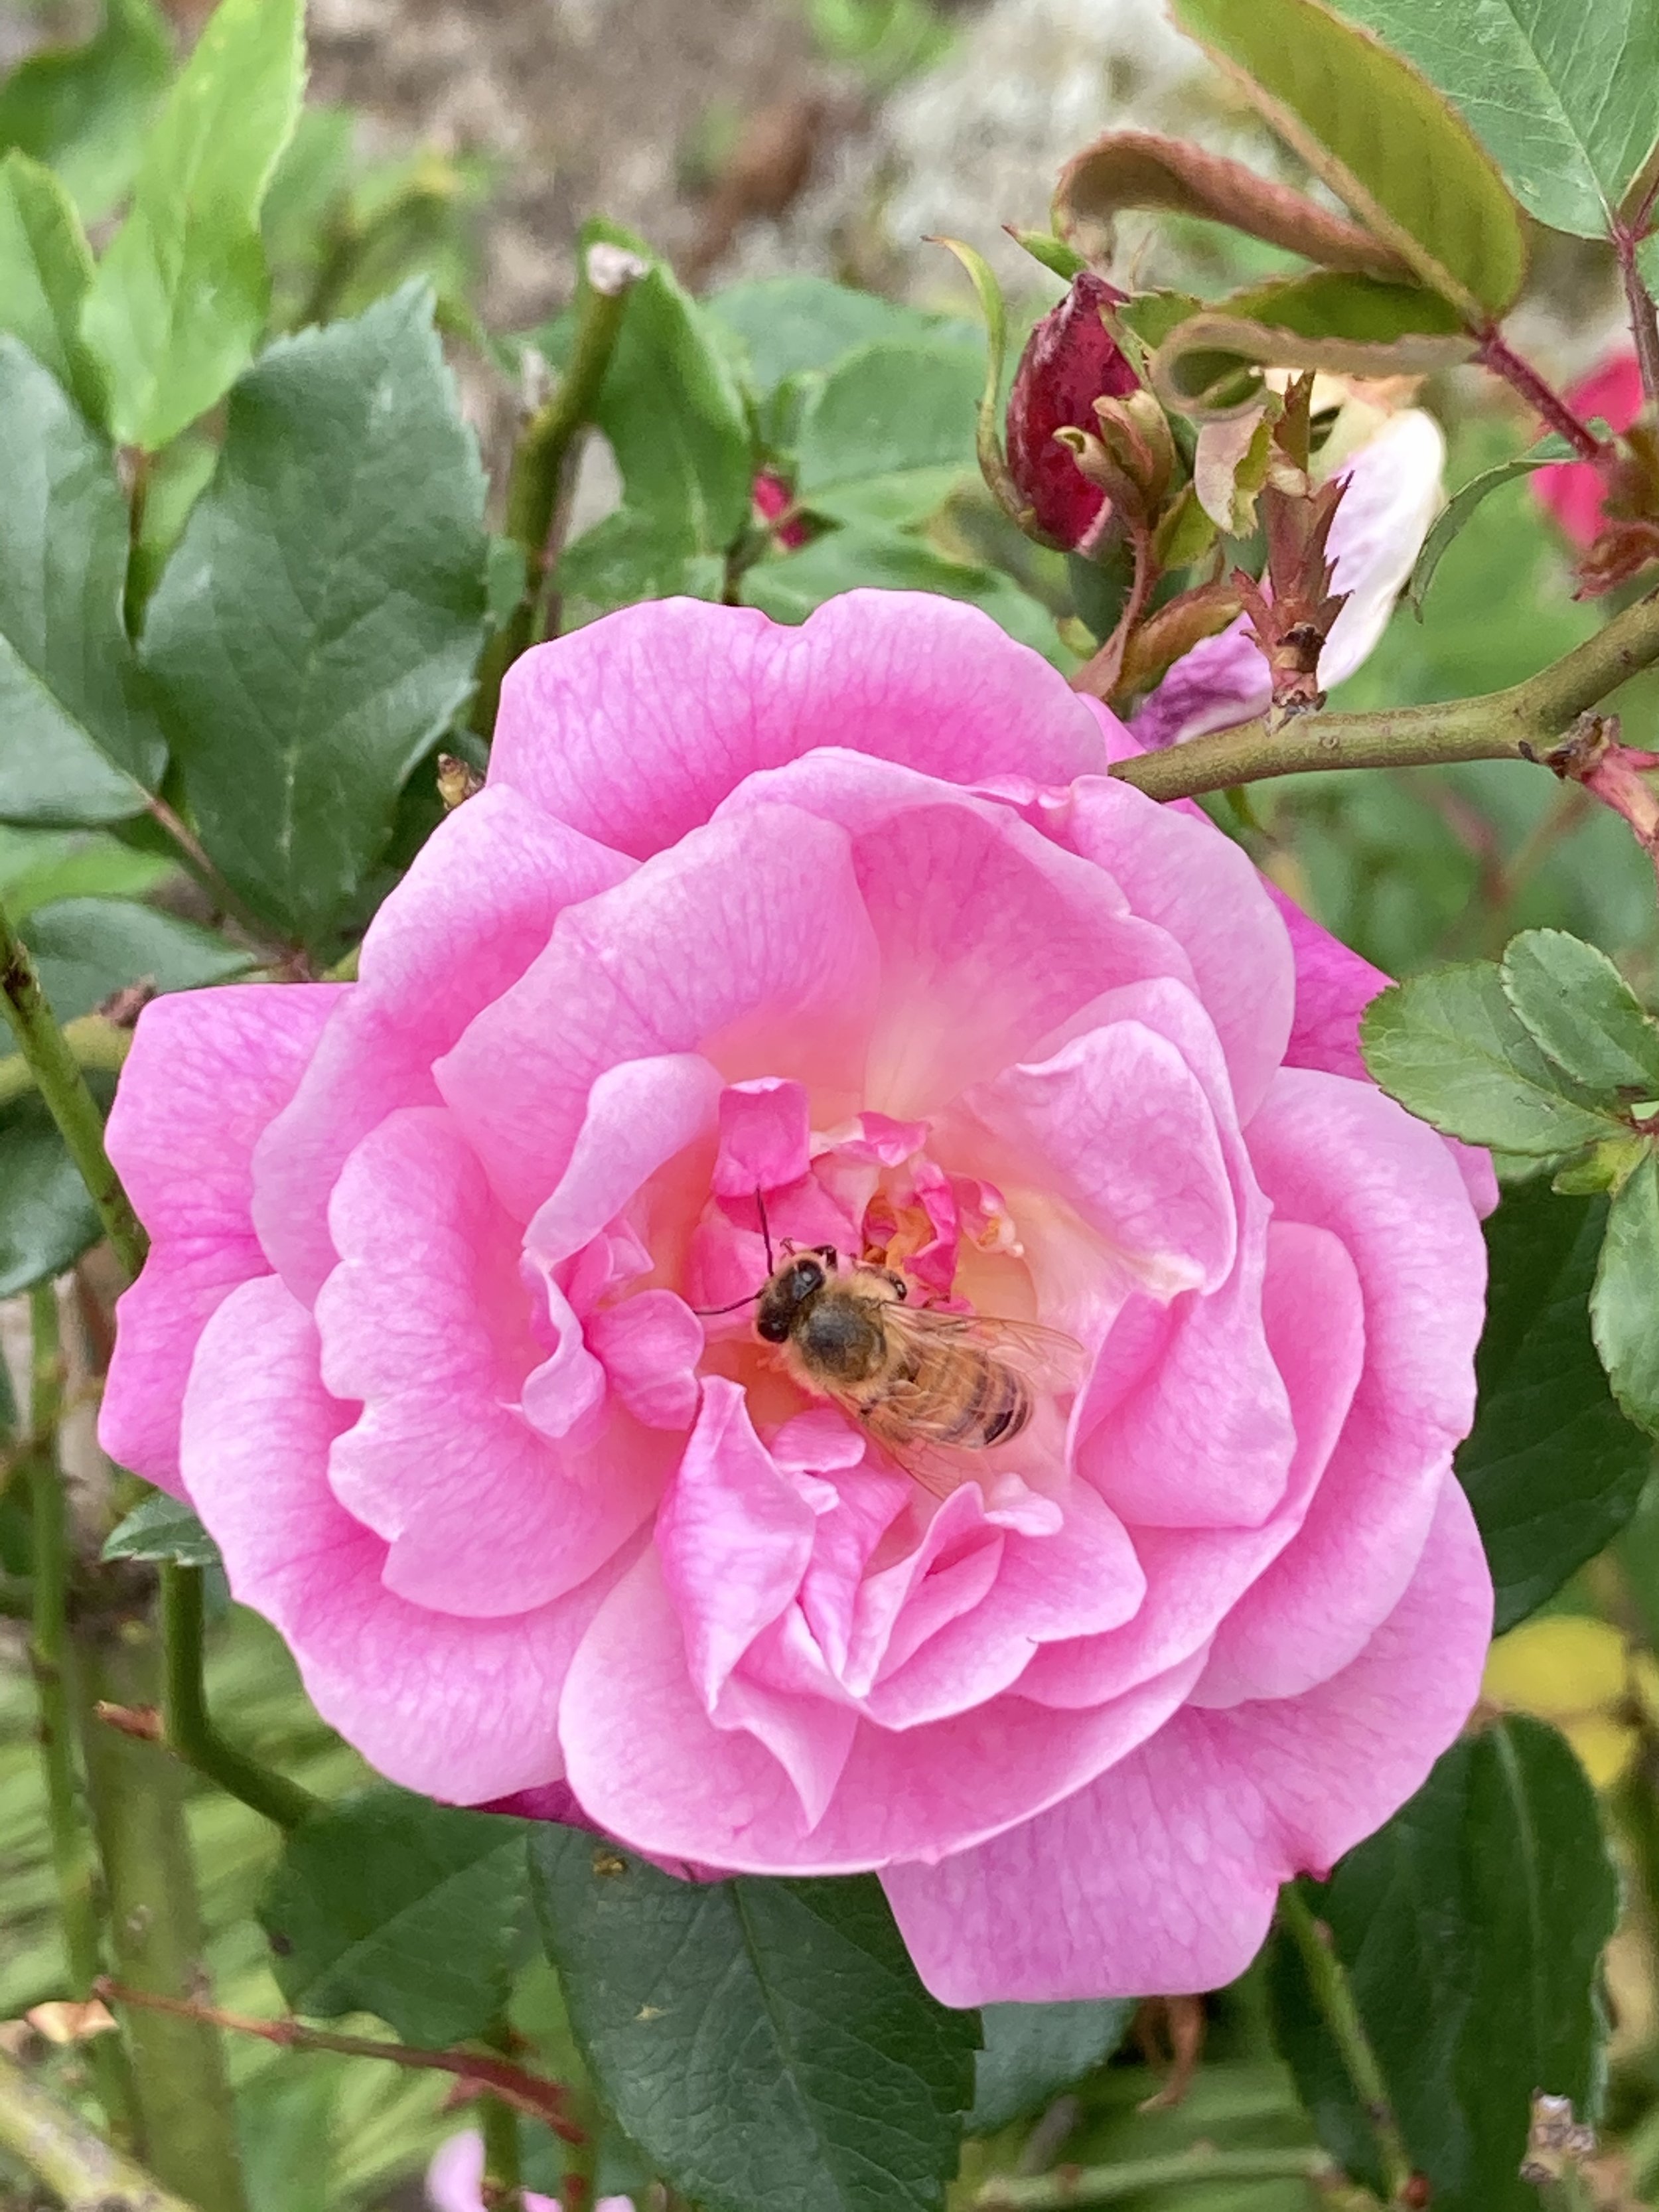 Rose and Honey Bee - Photography by Rose Skerten